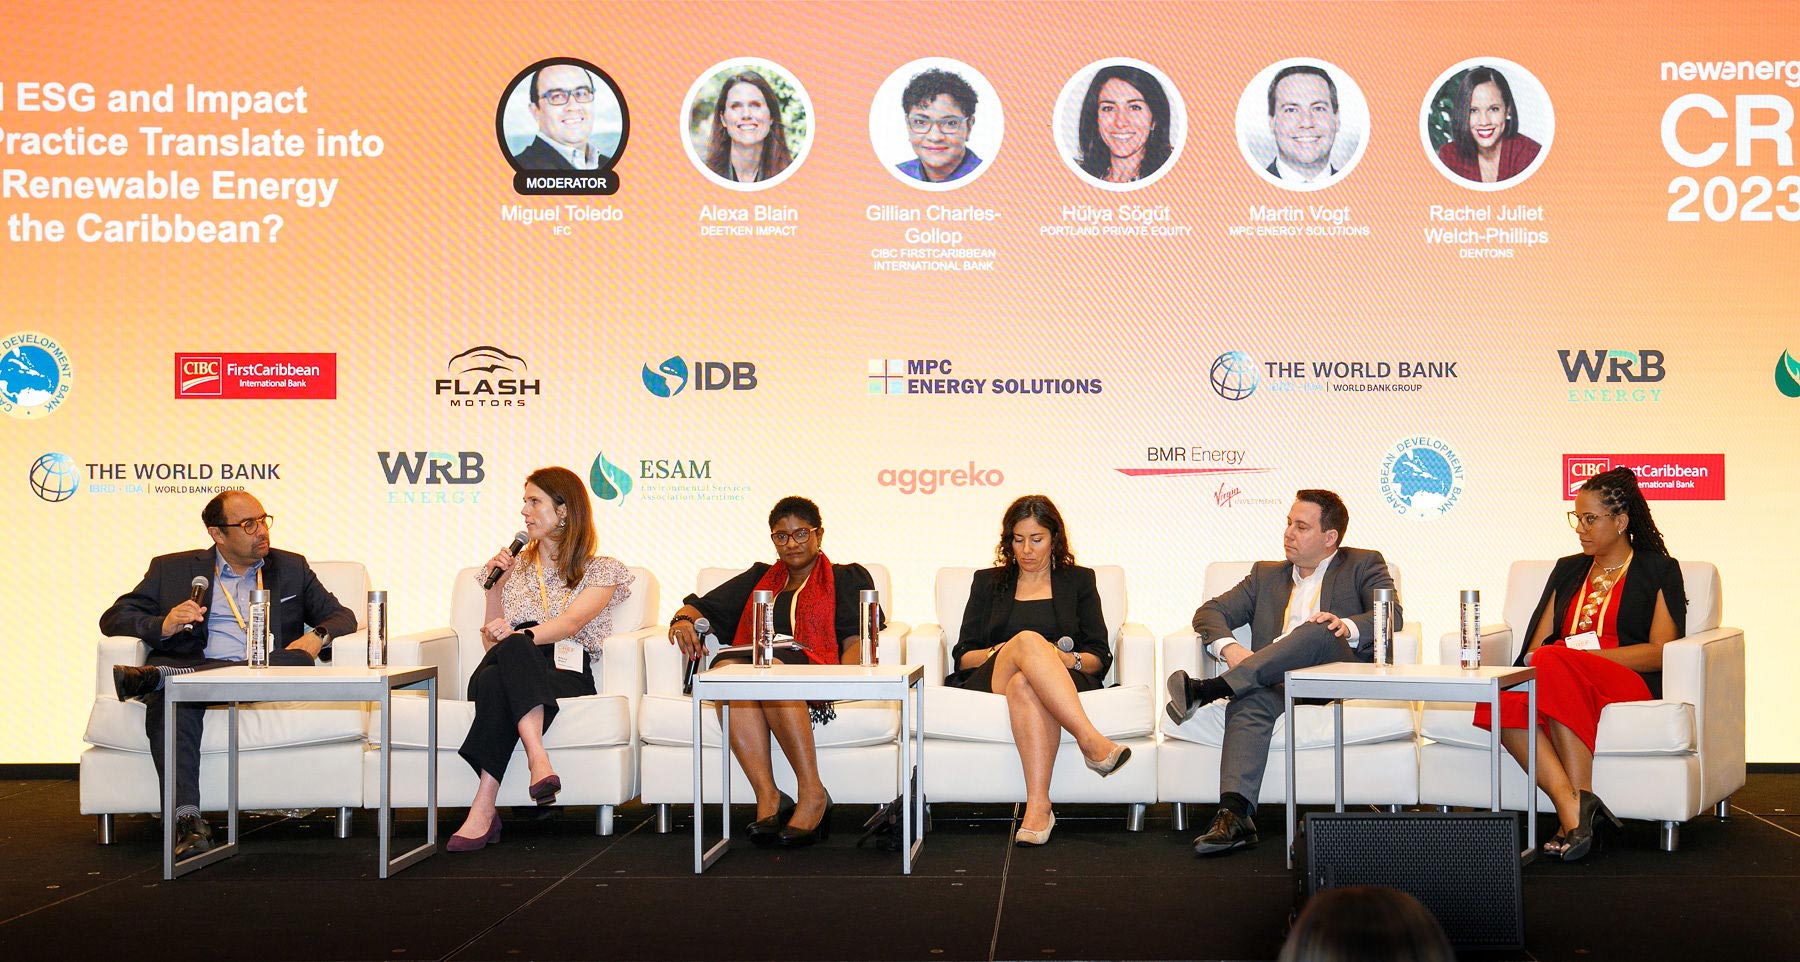 CREF holds a dynamic panel discussion around how ESG and impact investing practice can translate into capital for renewable energy projects in the Caribbean.